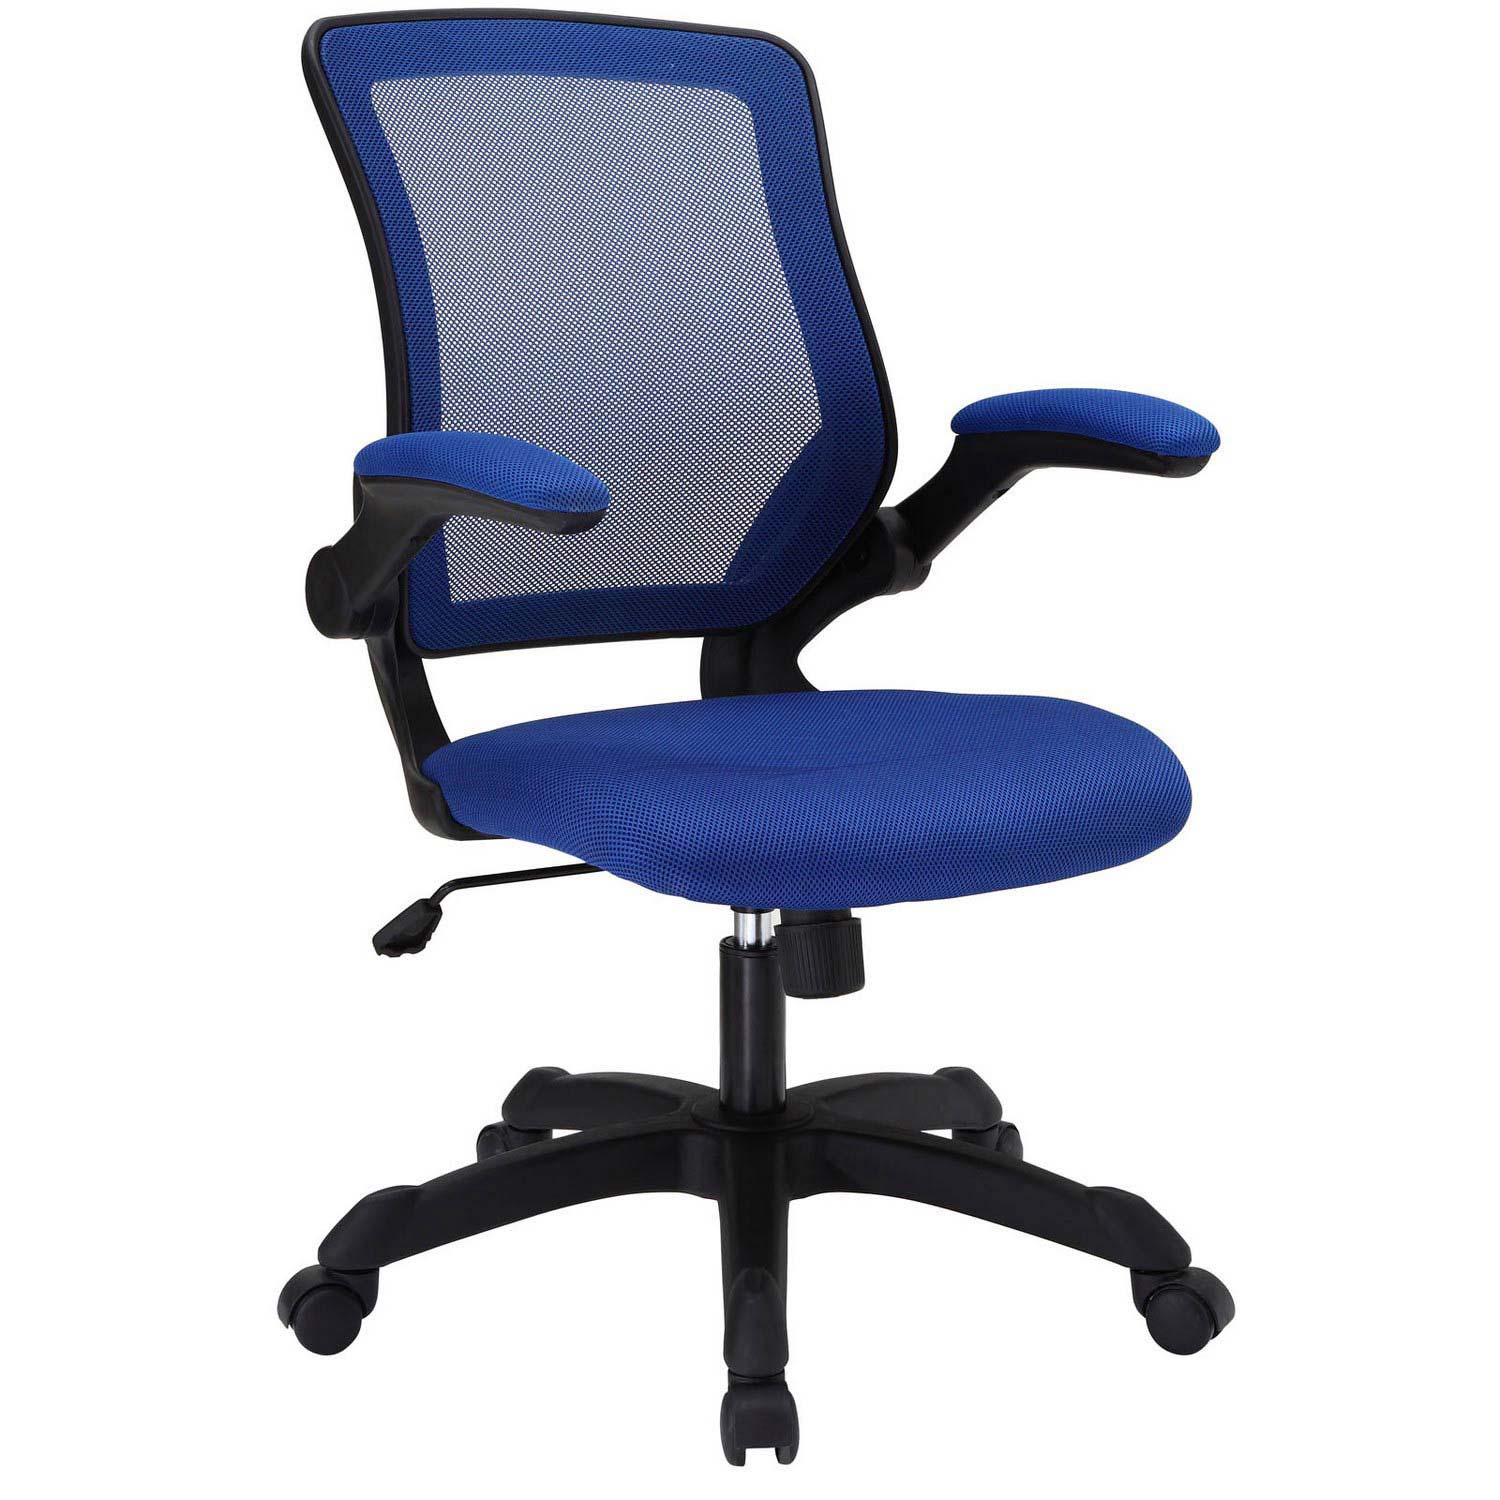 Modway Veer Mesh Office Chair - Blue